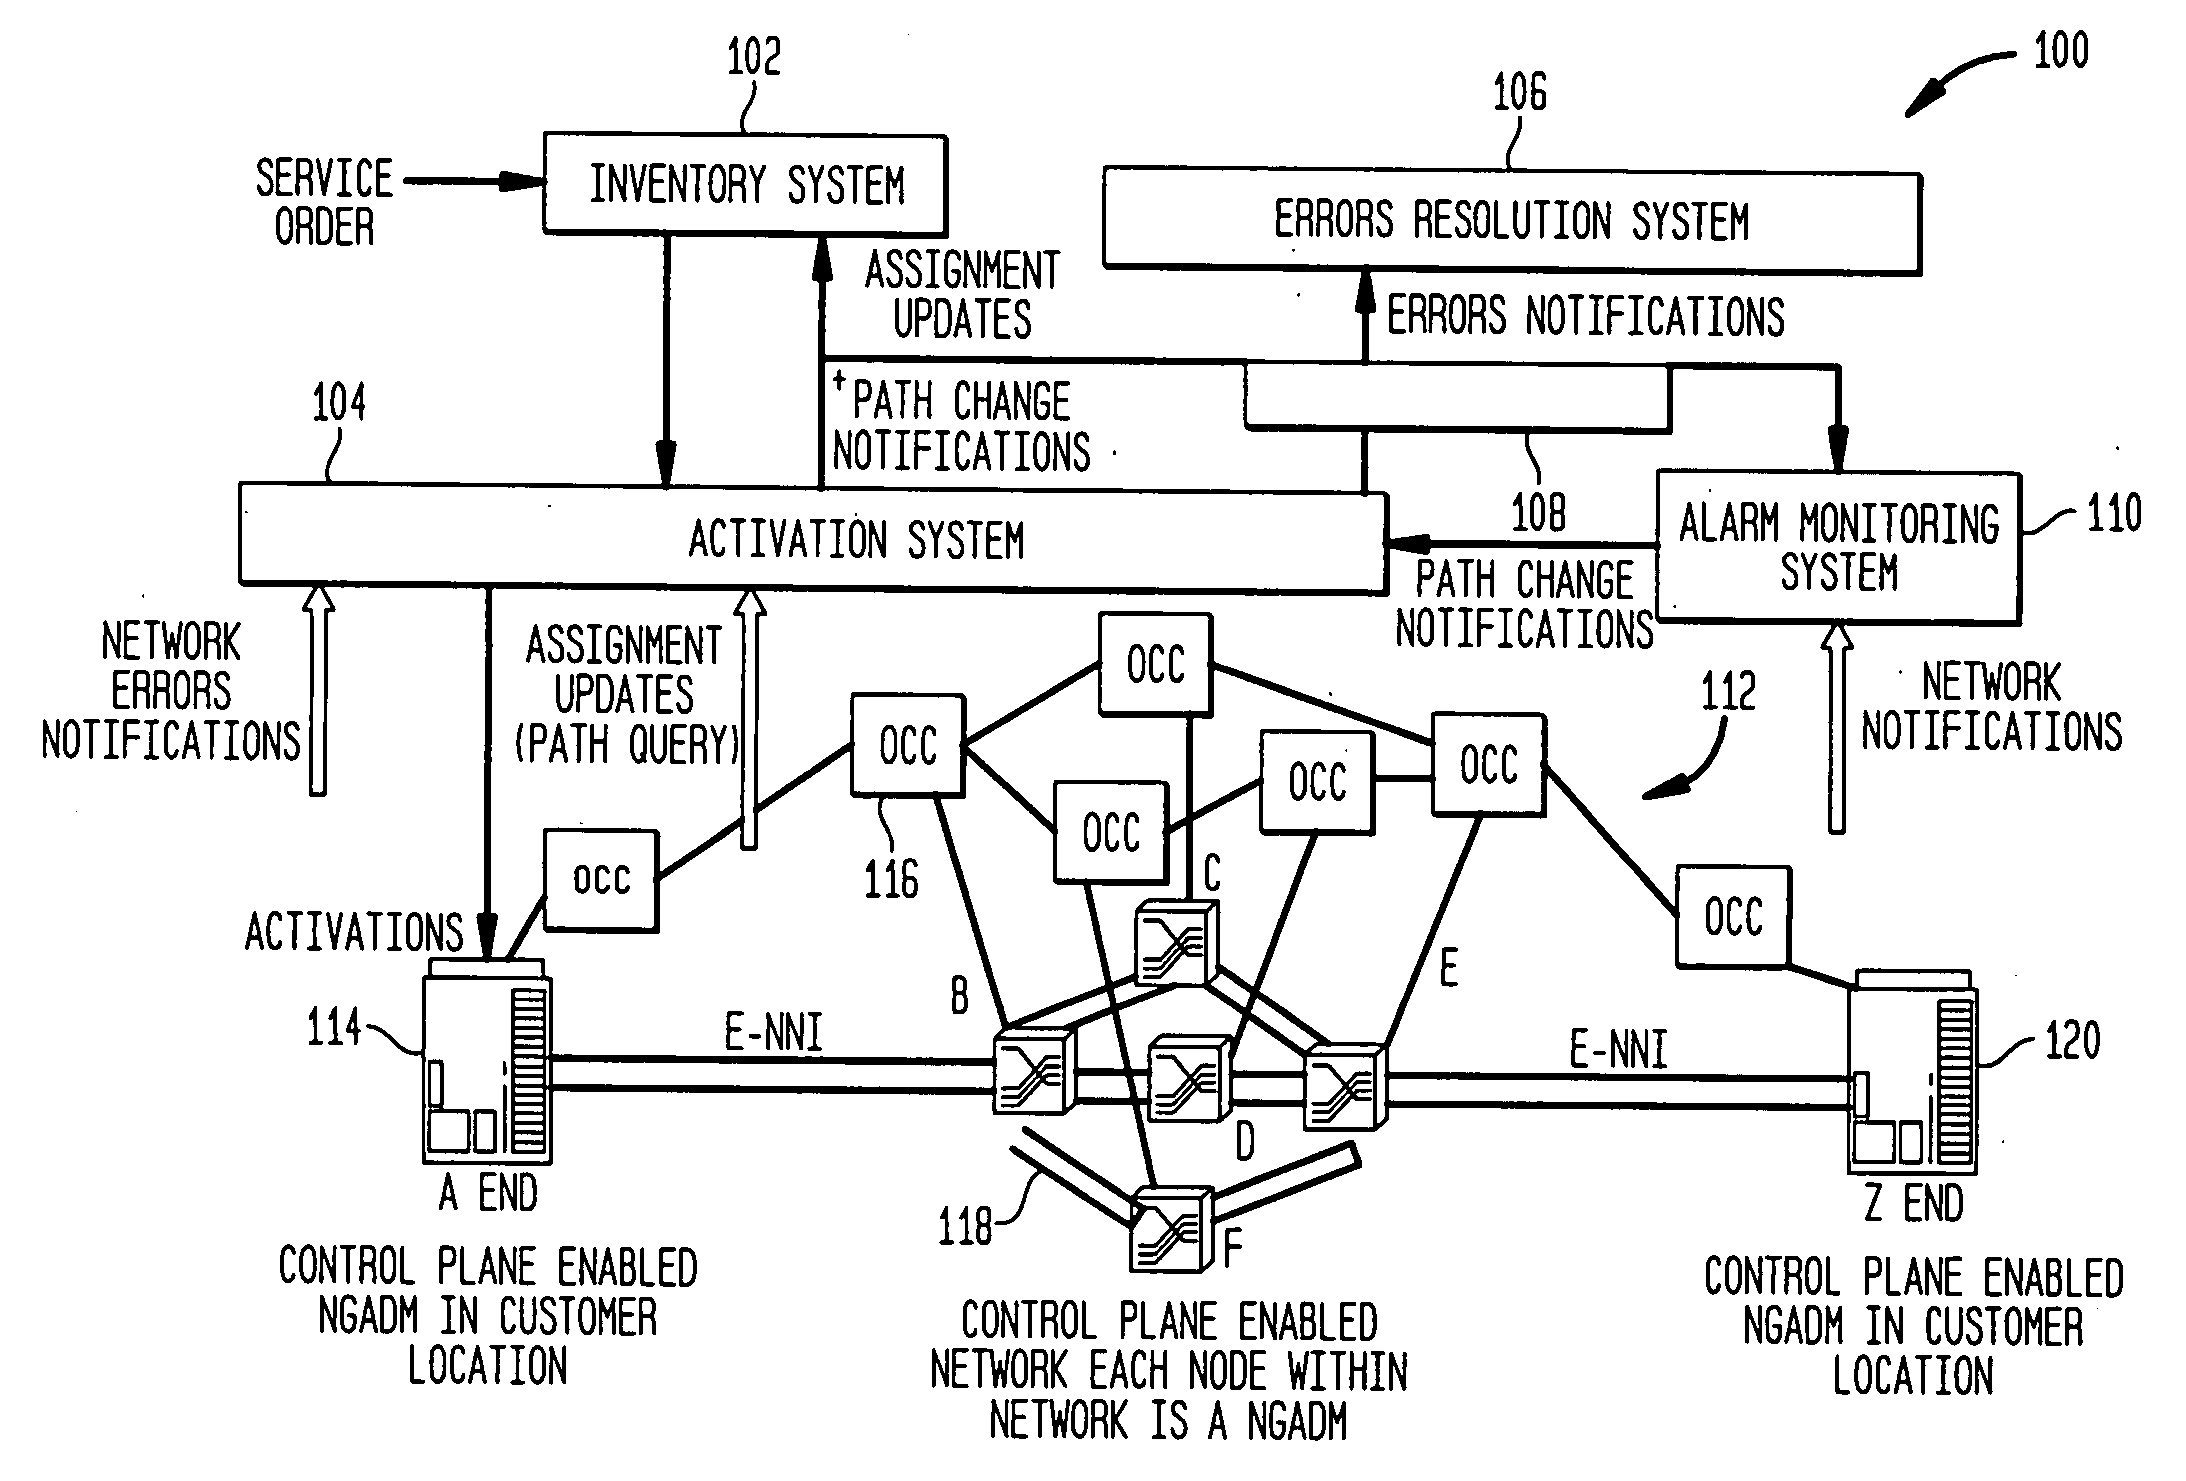 OSS Support for Control Plane Technology